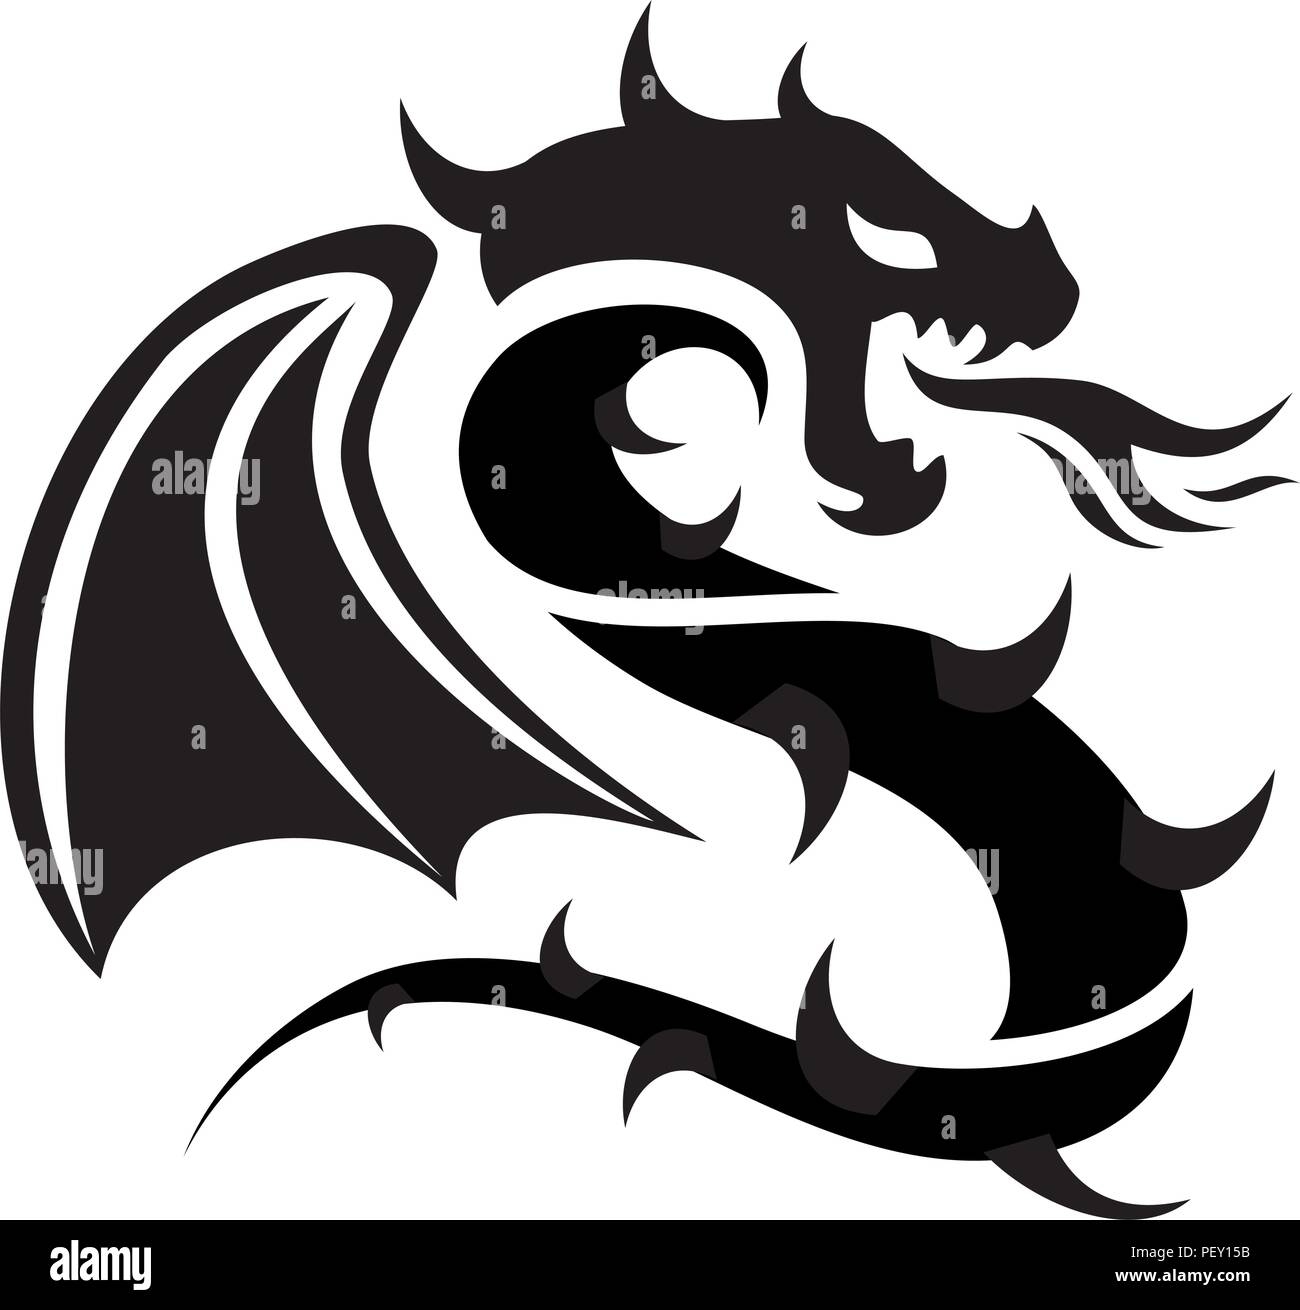 vector icon of flying dragon, black and white logo illustration ...